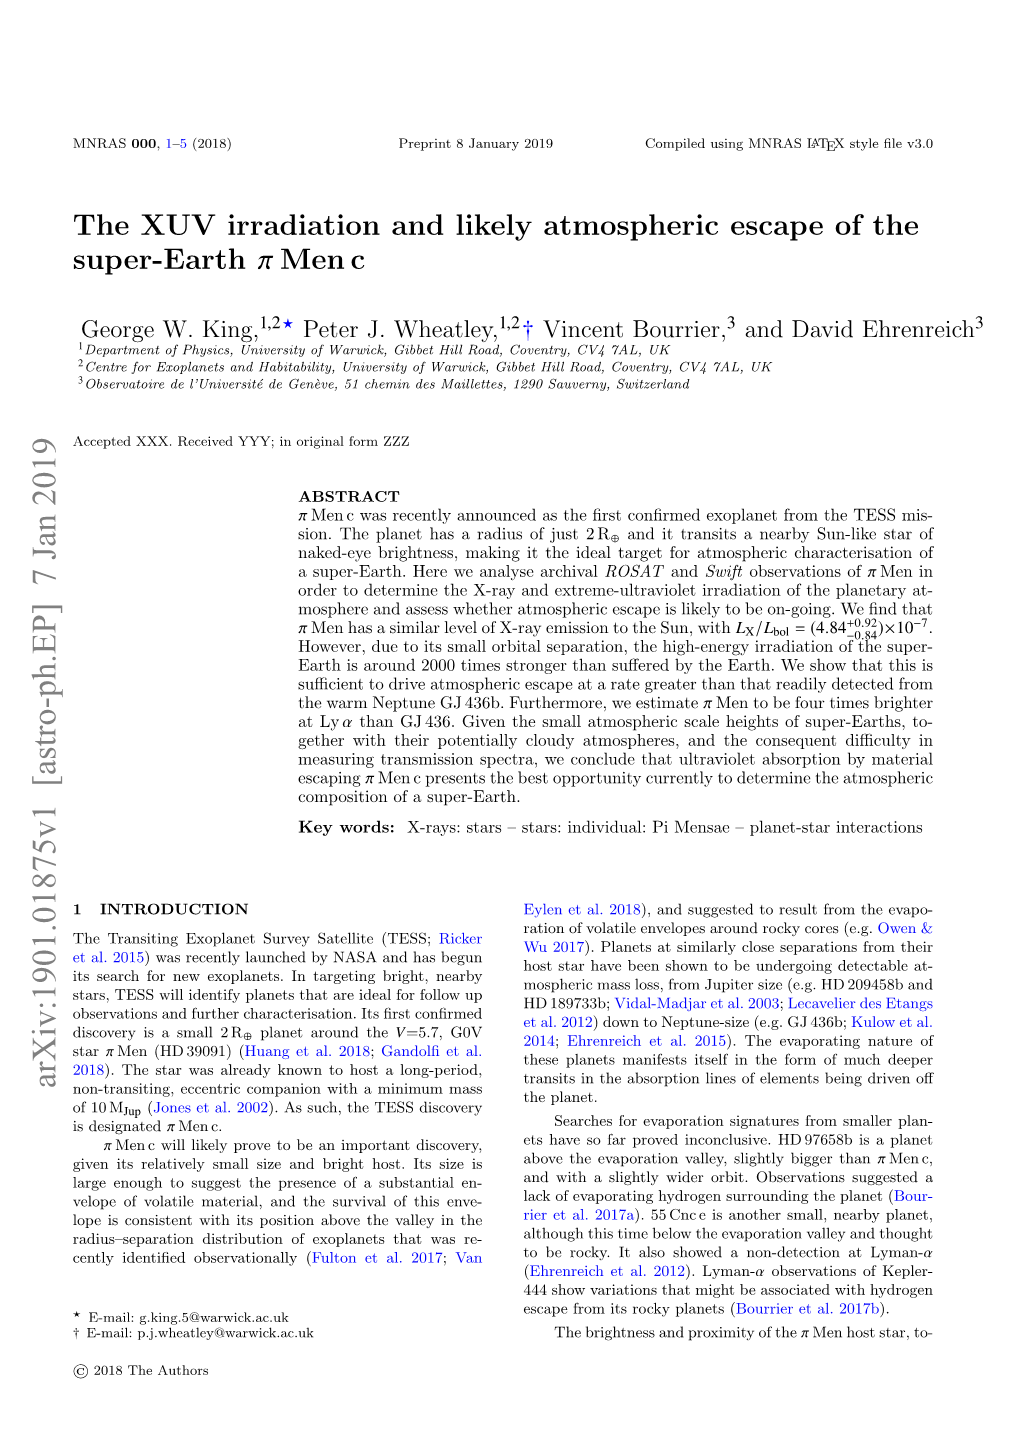 The XUV Irradiation and Likely Atmospheric Escape of the Super-Earth Π Men C